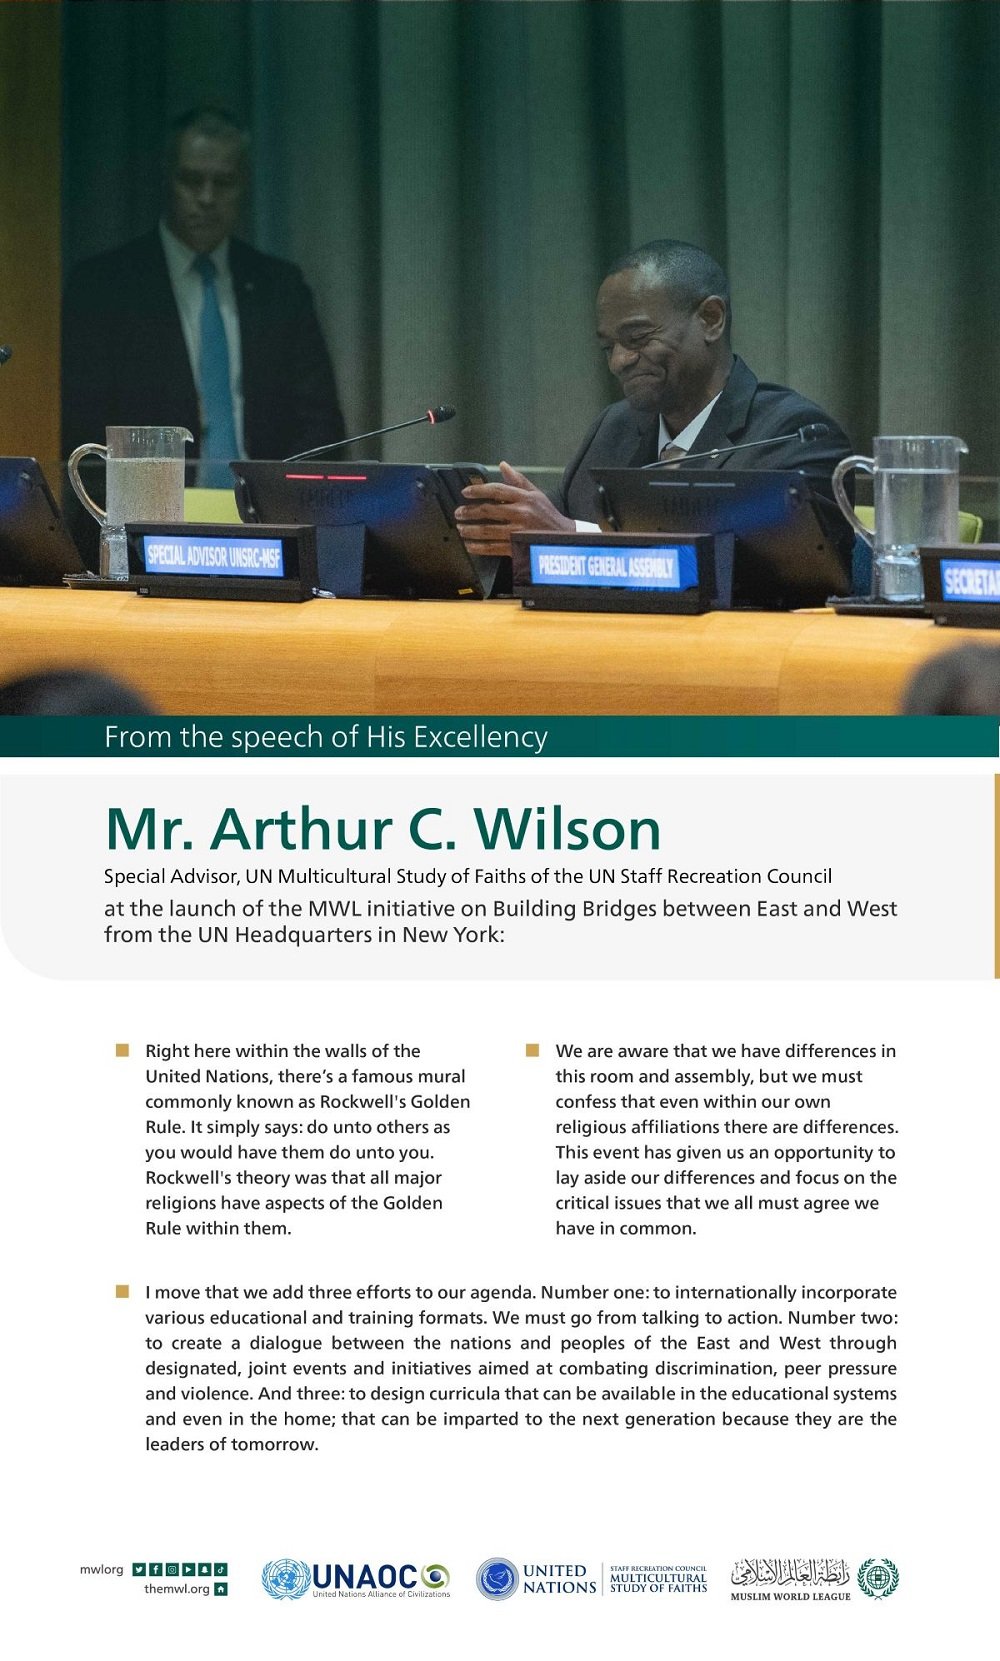 Highlights from the speech of His Excellency Mr. Arthur C. Wilson, Special Advisor, UN Multicultural Study of Faiths of the UN Staff Recreation Council, at the launch of the MWL initiative on Building Bridges between East and West at the UN headquarters in New York: